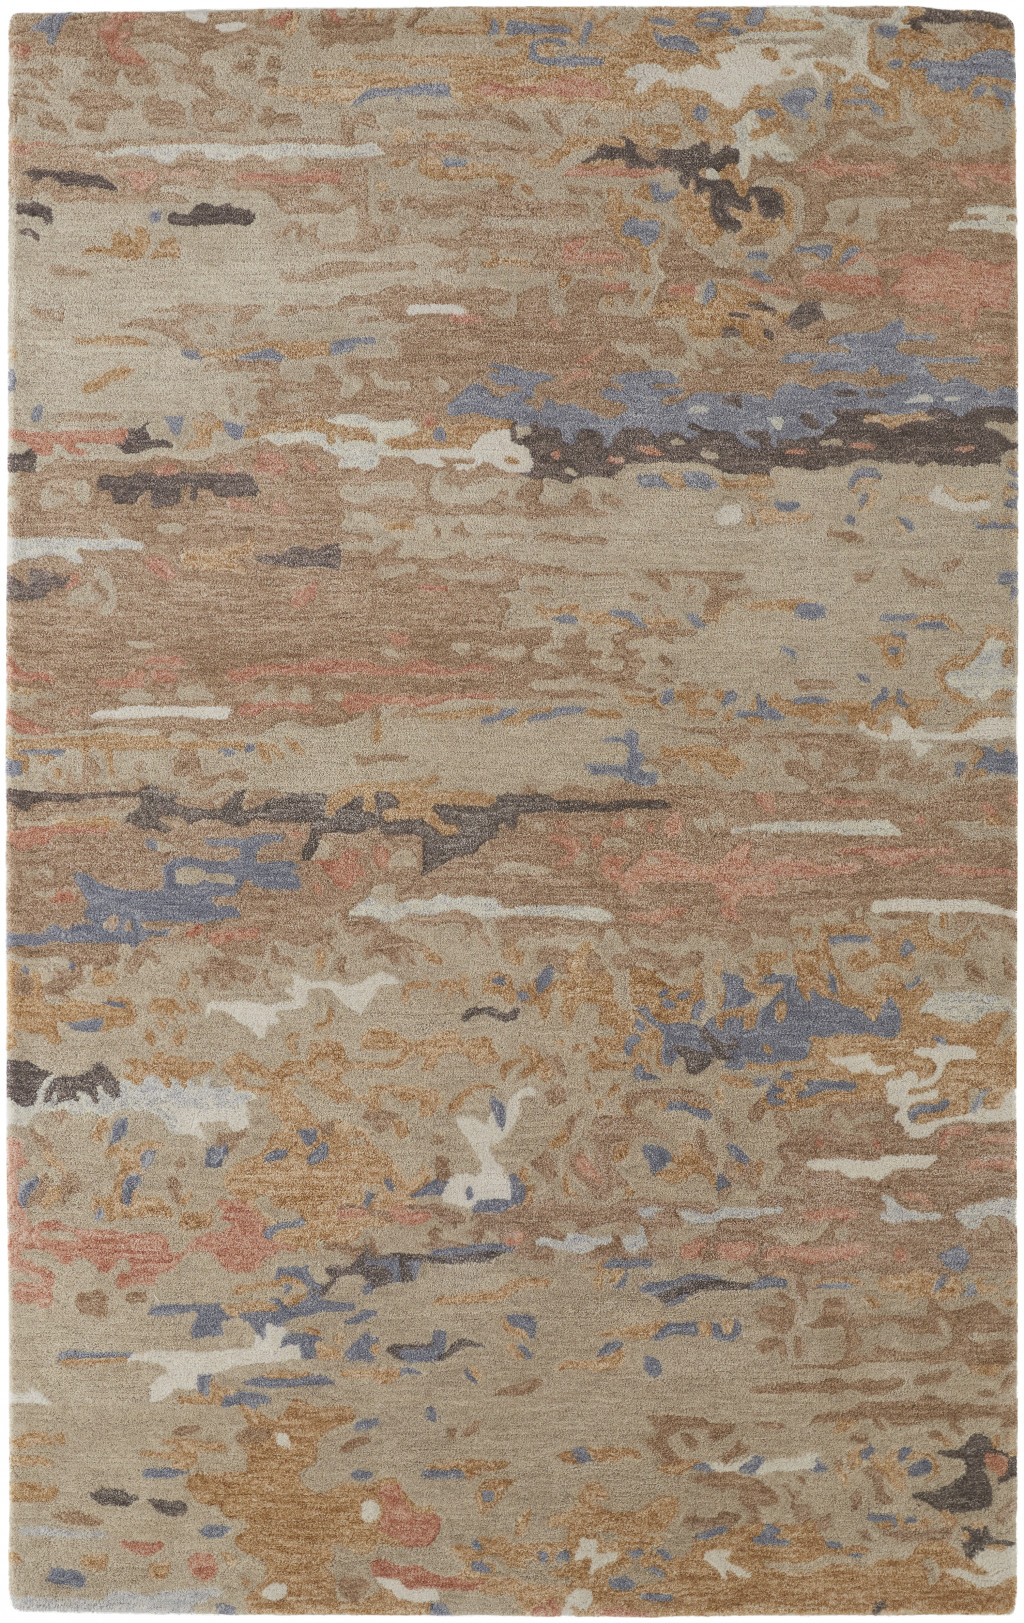 2' X 3' Tan And Blue Wool Abstract Tufted Handmade Stain Resistant Area Rug-513613-1